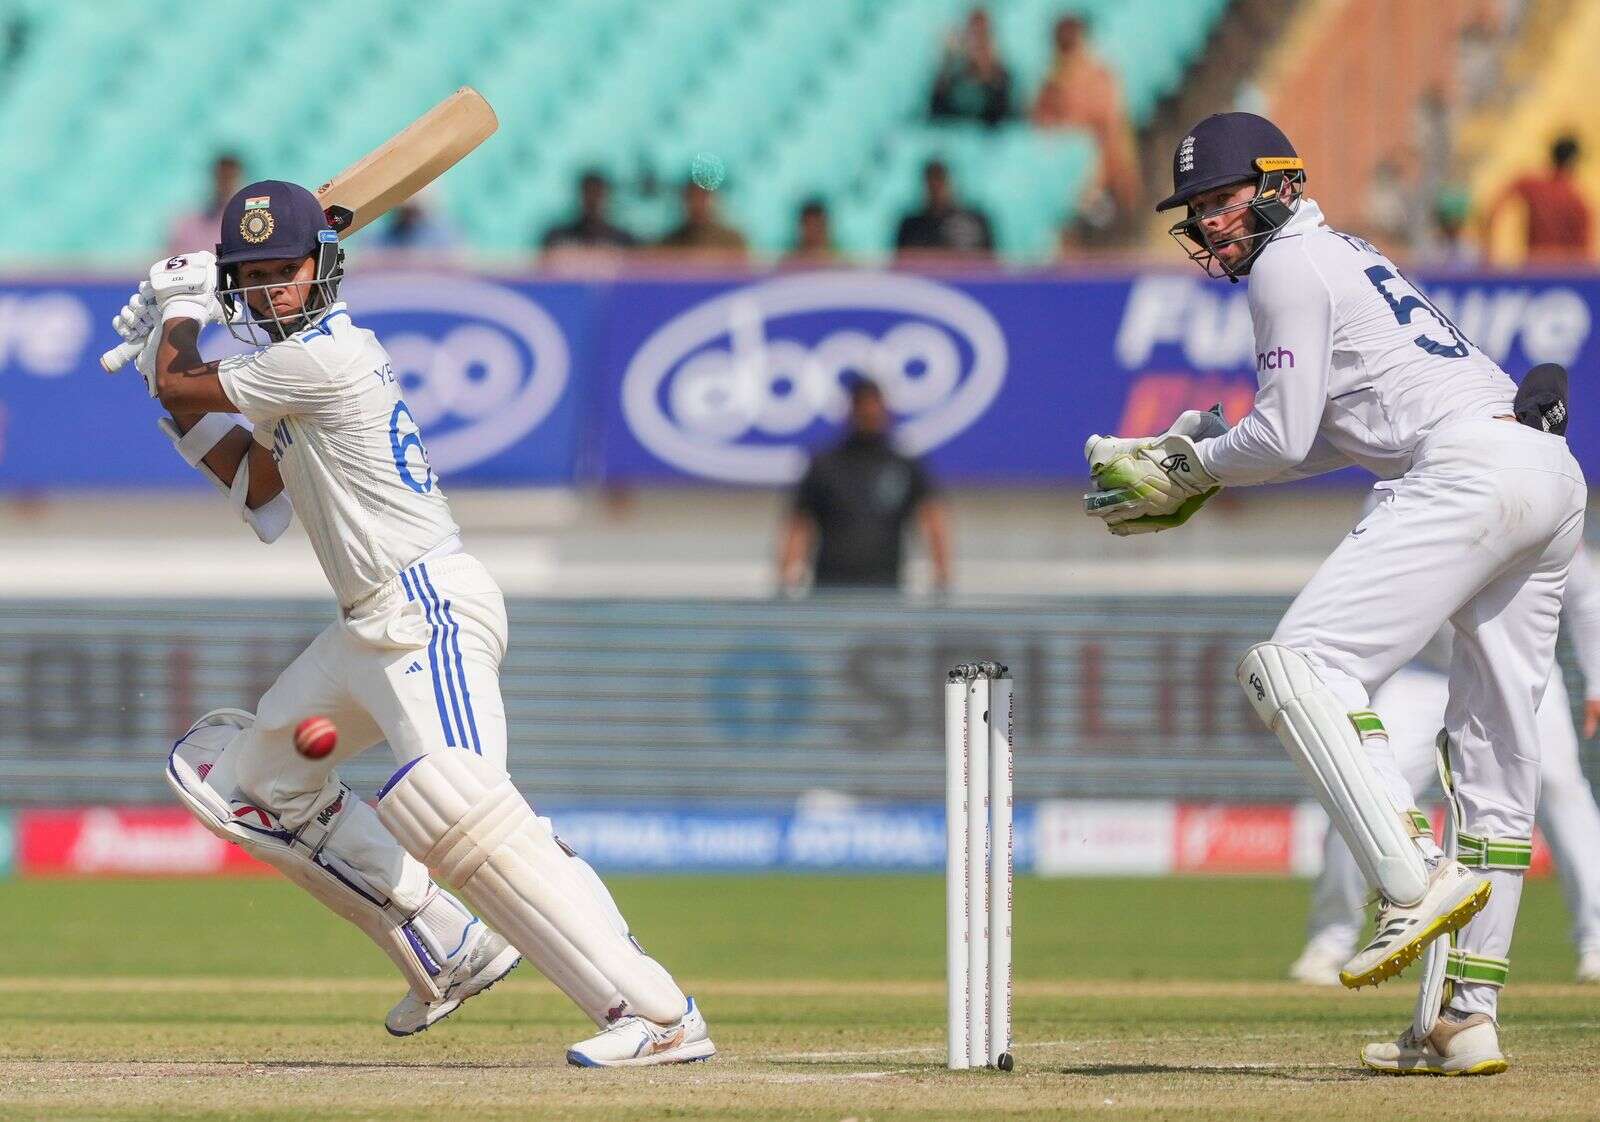 jaiswal's quickfire ton gives india the upper hand in 3rd test against england